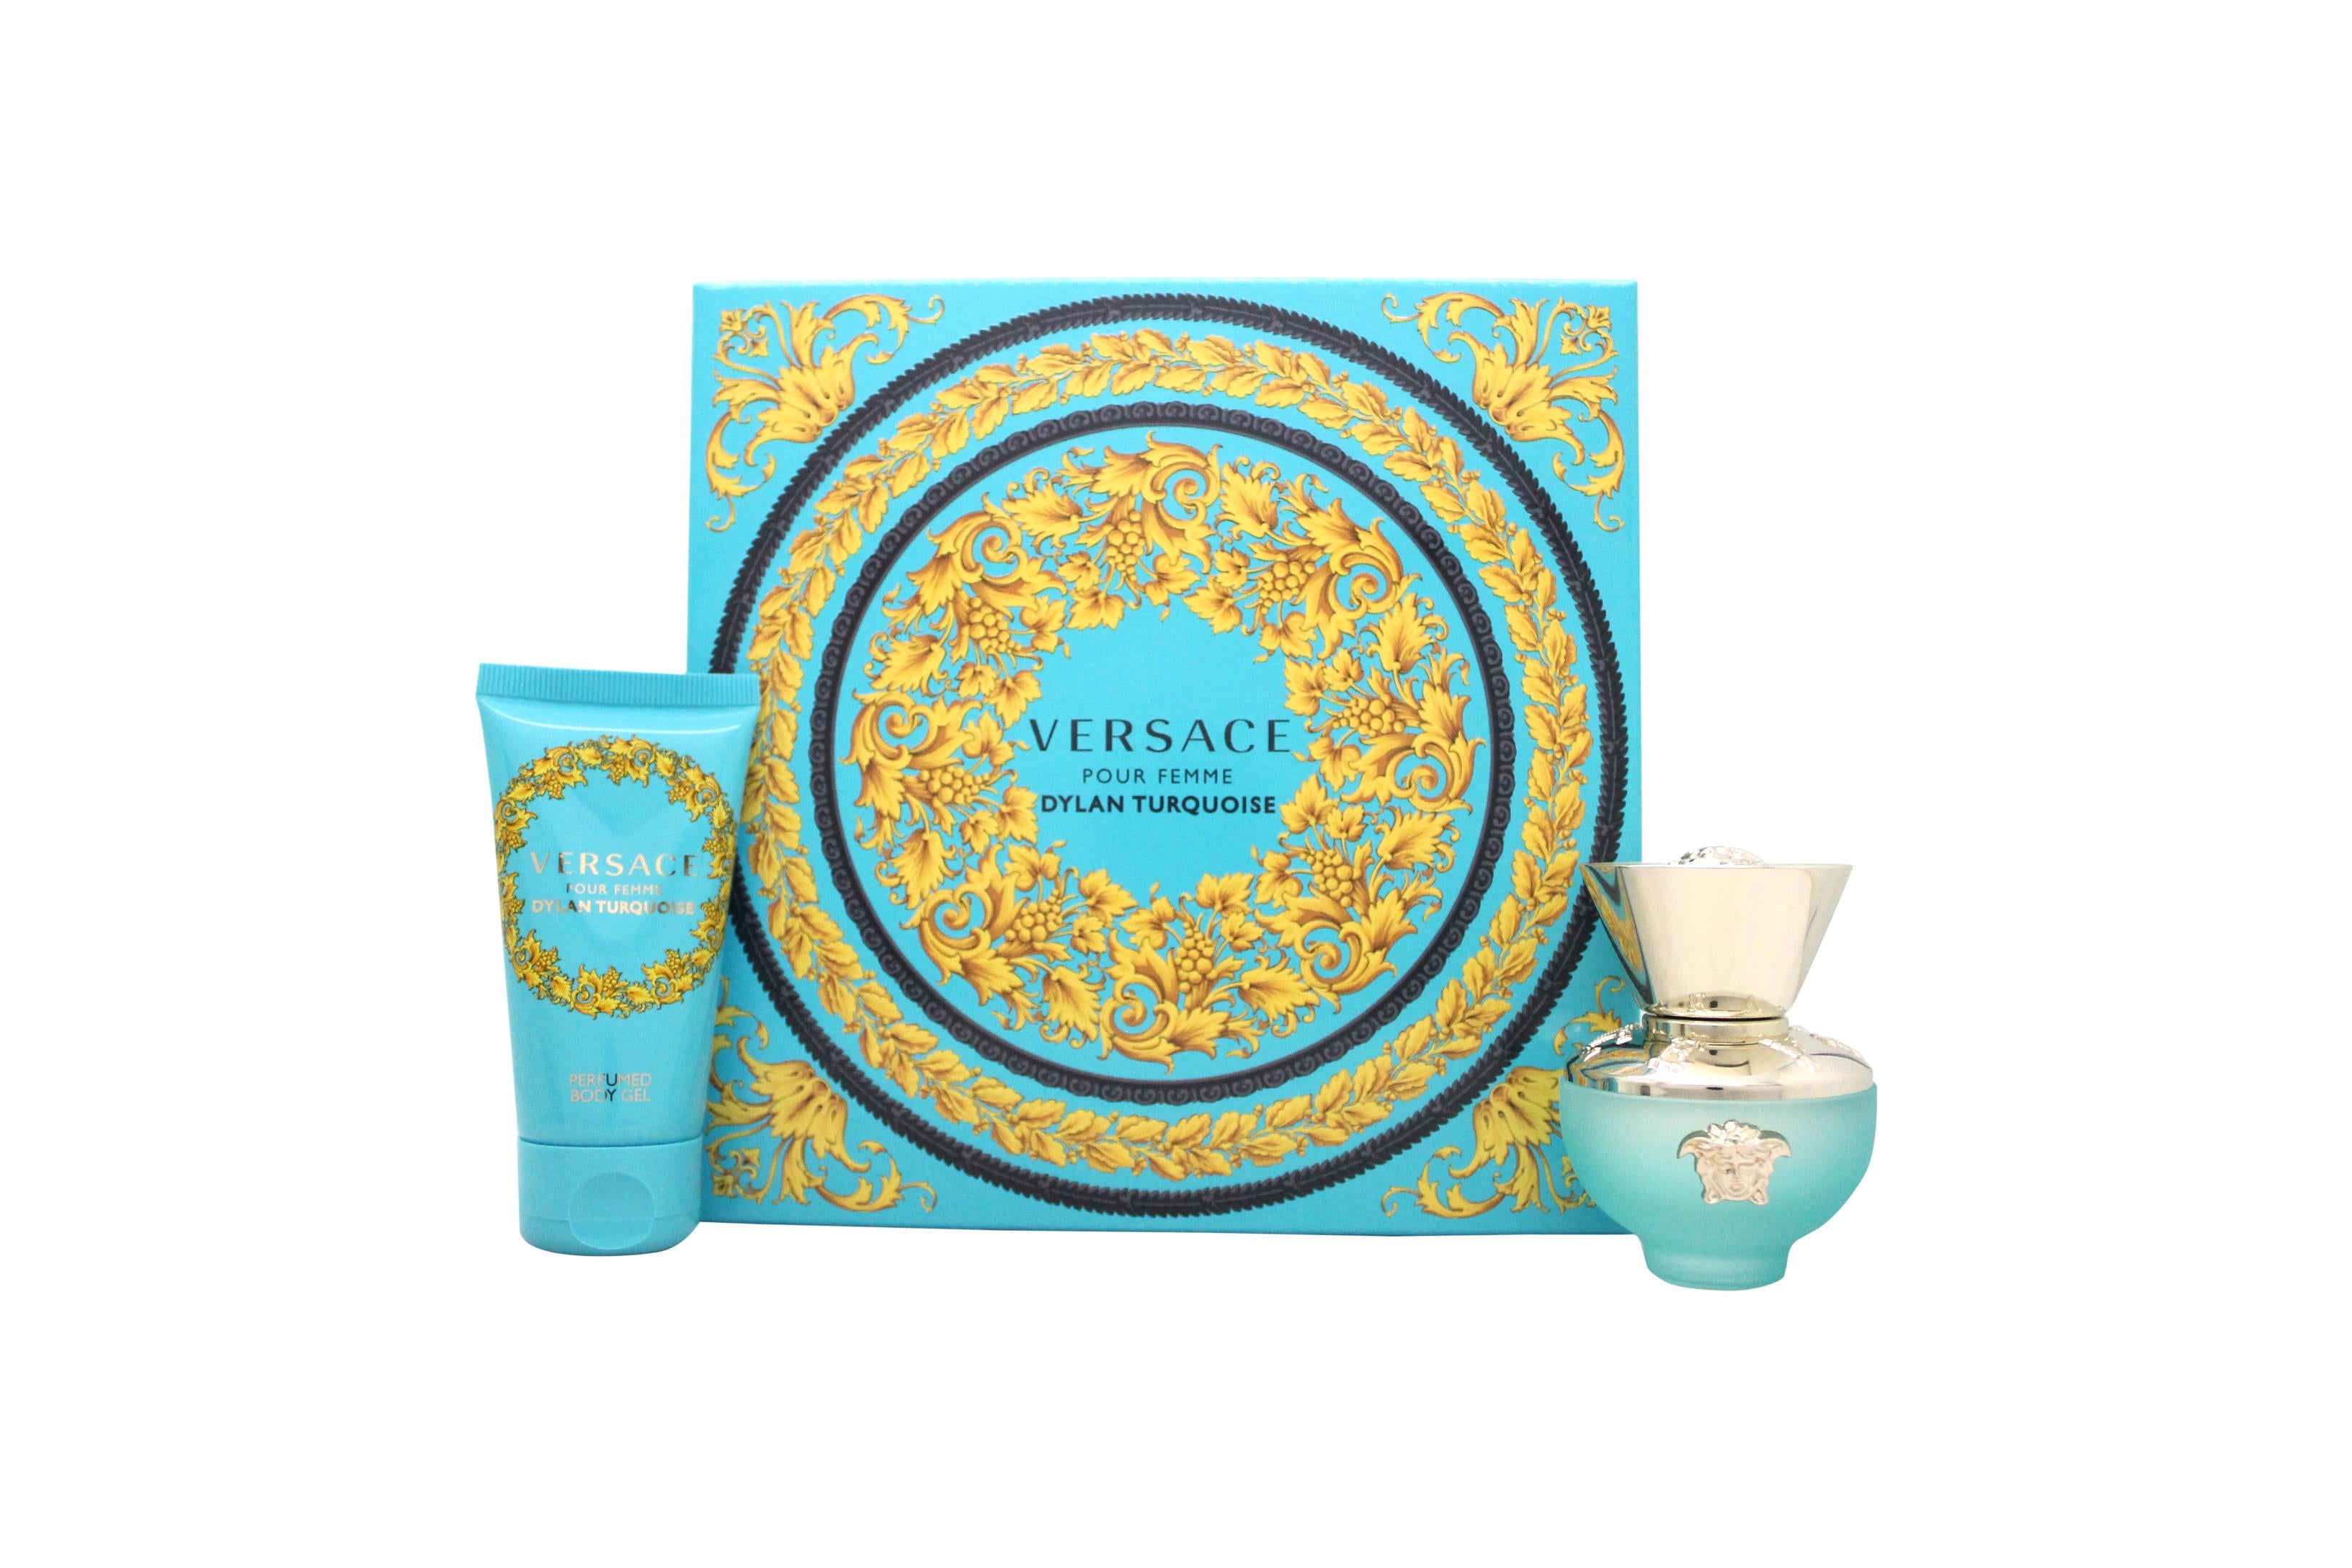 View Versace Pour Femme Dylan Turquoise Gift Set 30ml EDT 50ml Perfumed Body Gel information